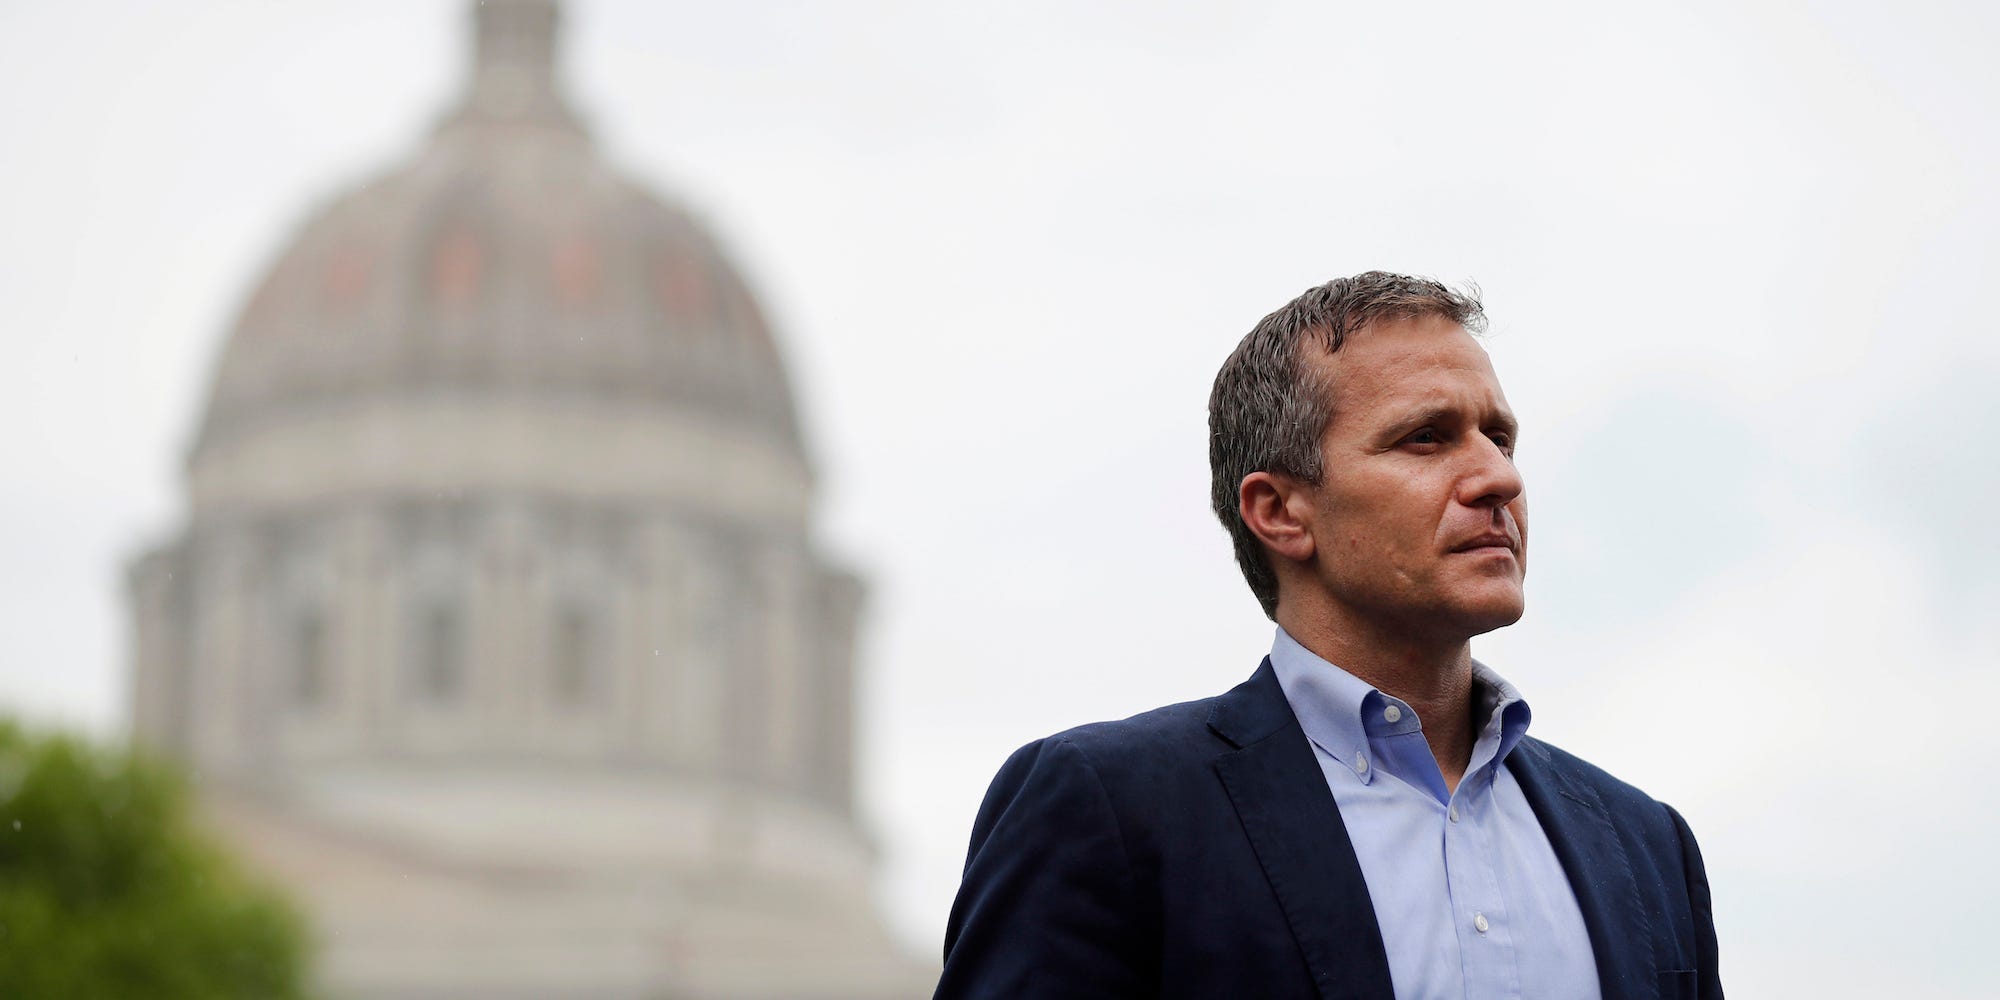 Former Governor Eric Greitens of Missouri near the State Capitol in Jefferson City, MO on May 17, 2018.